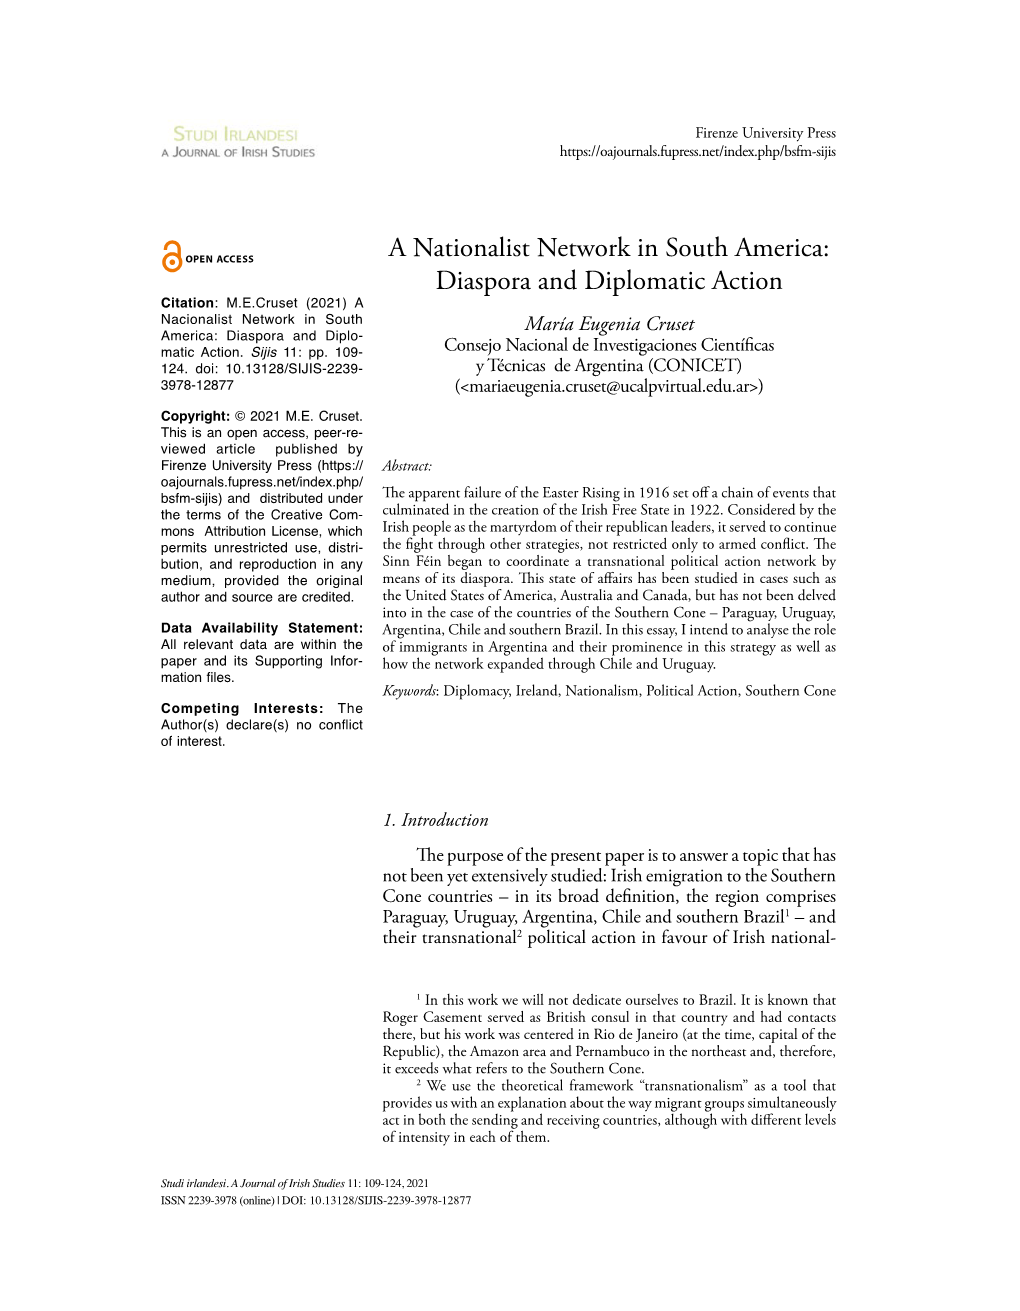 A Nationalist Network in South America: Diaspora and Diplomatic